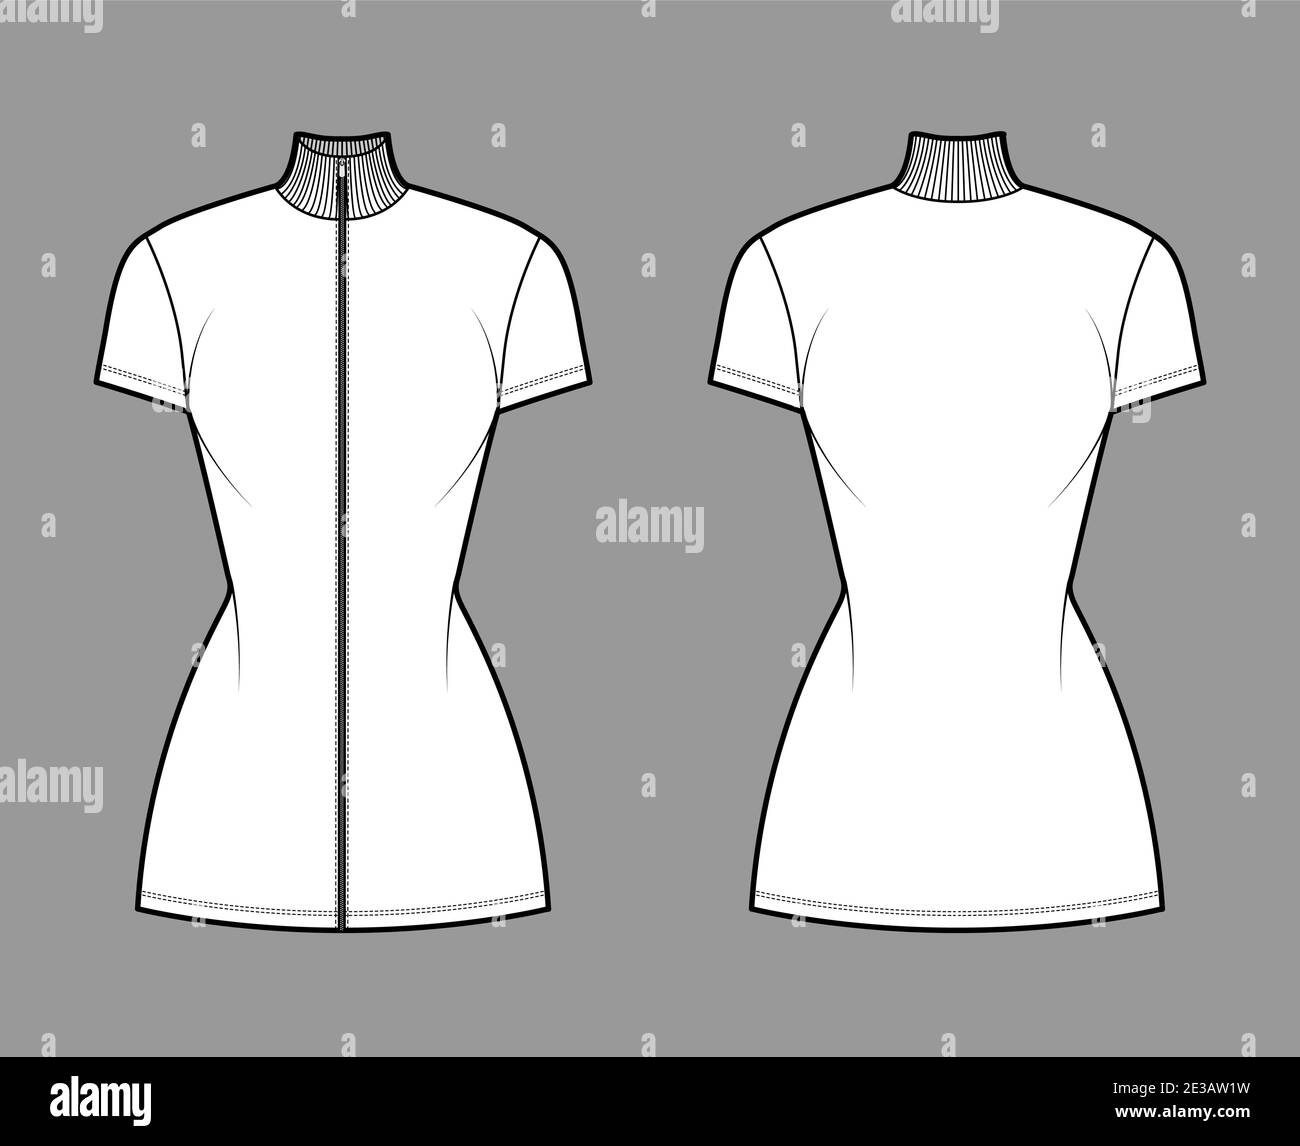 Turtleneck zip-up dress technical fashion illustration with short sleeves, mini length, fitted body, Pencil fullness. Flat apparel template front, back, white color. Women, men unisex CAD mockup Stock Vector